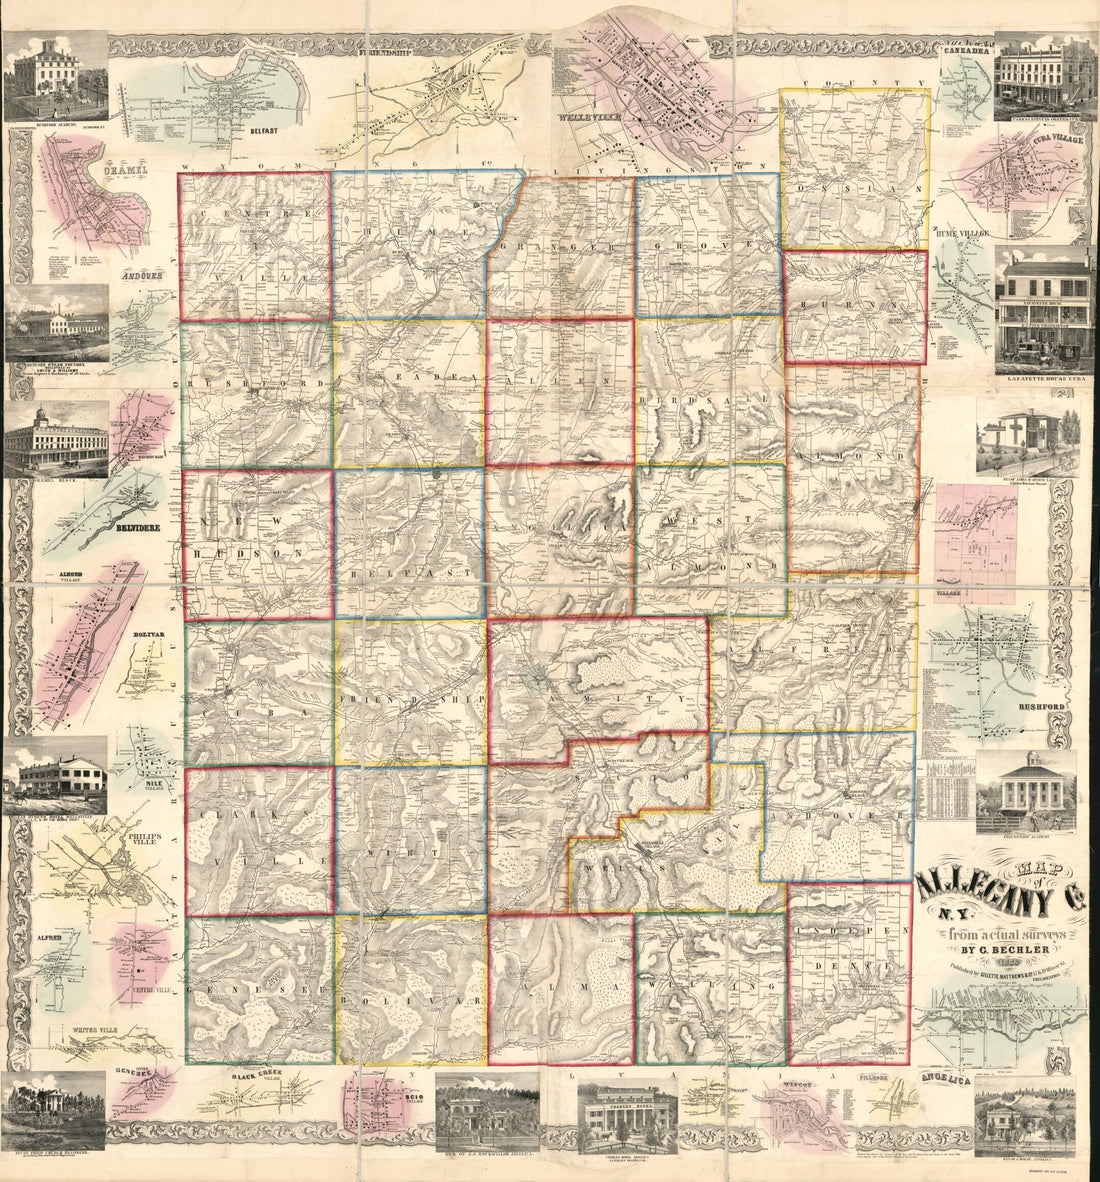 This old map of Map of Allegany Co., New York : from Actual Surveys from 1856 was created by Gustavus R. Bechler, Matthews &amp; Co Gillette, Robert Pearsall Smith in 1856